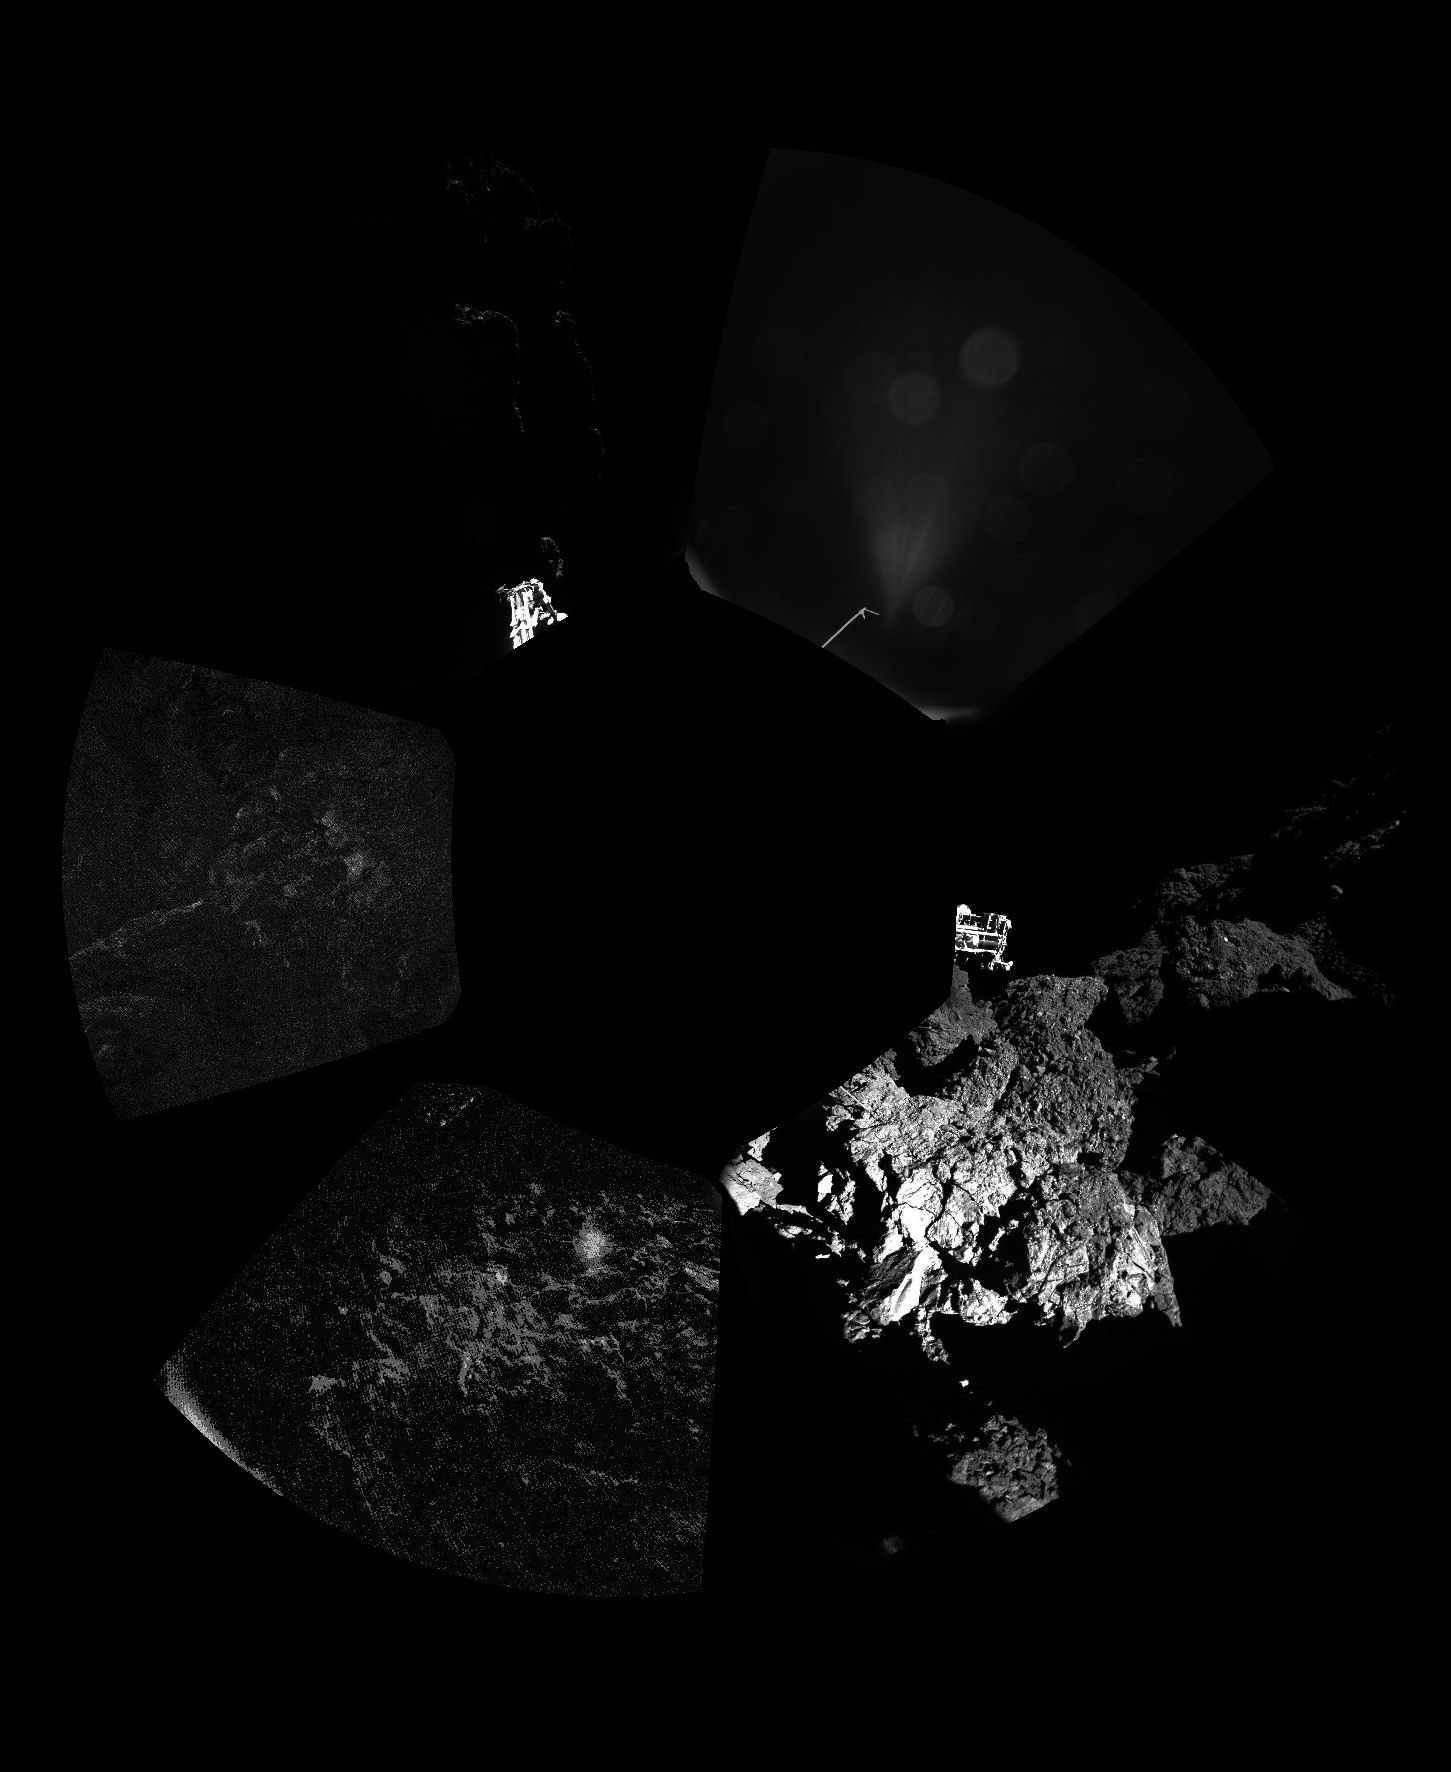 Rosetta’s lander Philae has returned the first panoramic image (above) from the surface of a comet. The unprocessed view shows a 360º view around the point of final touchdown. The three feet of Philae’s landing gear can be seen in some of the frames. Credit: ESA/Rosetta/Philae/CIVA